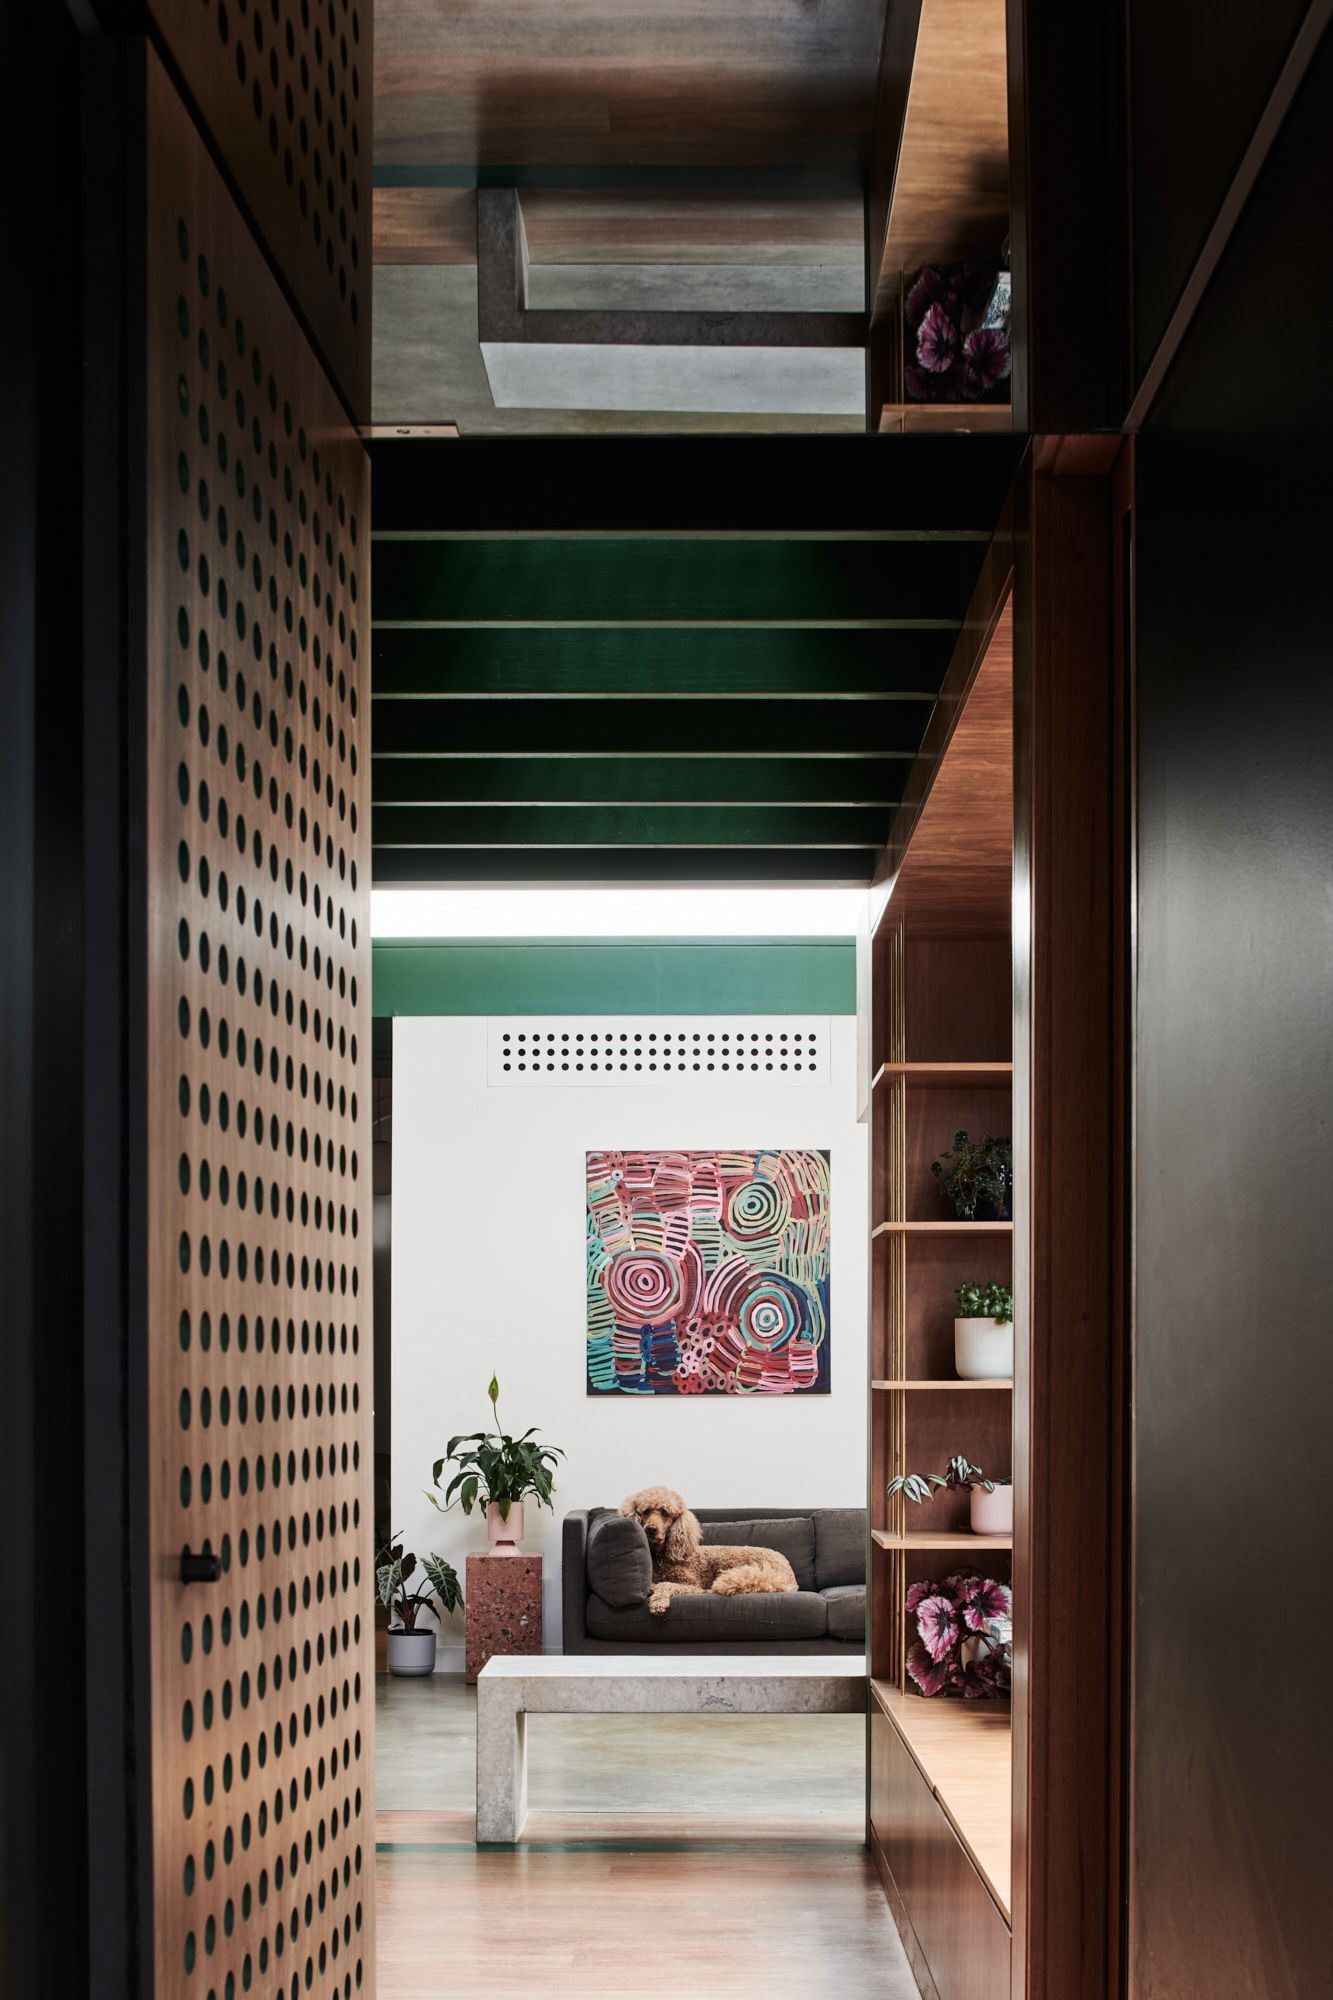 Hot Top Peak by FIGR Architecture. Hallways view into living room.